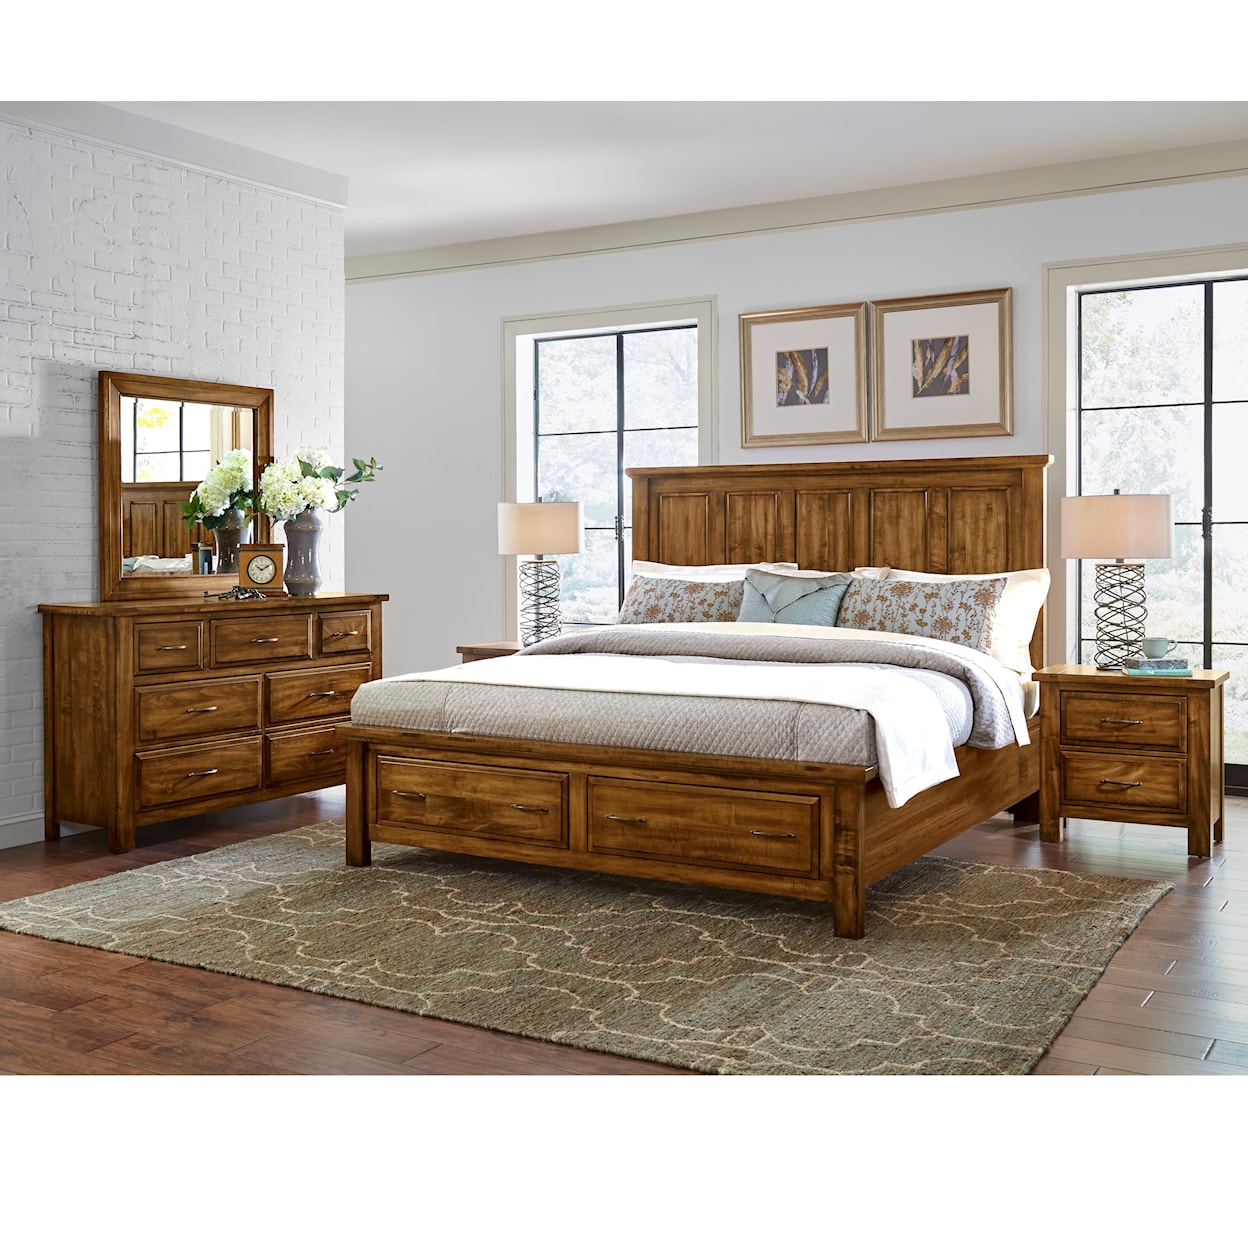 Virginia House Mt Airy Queen Slat Poster Storage Bed